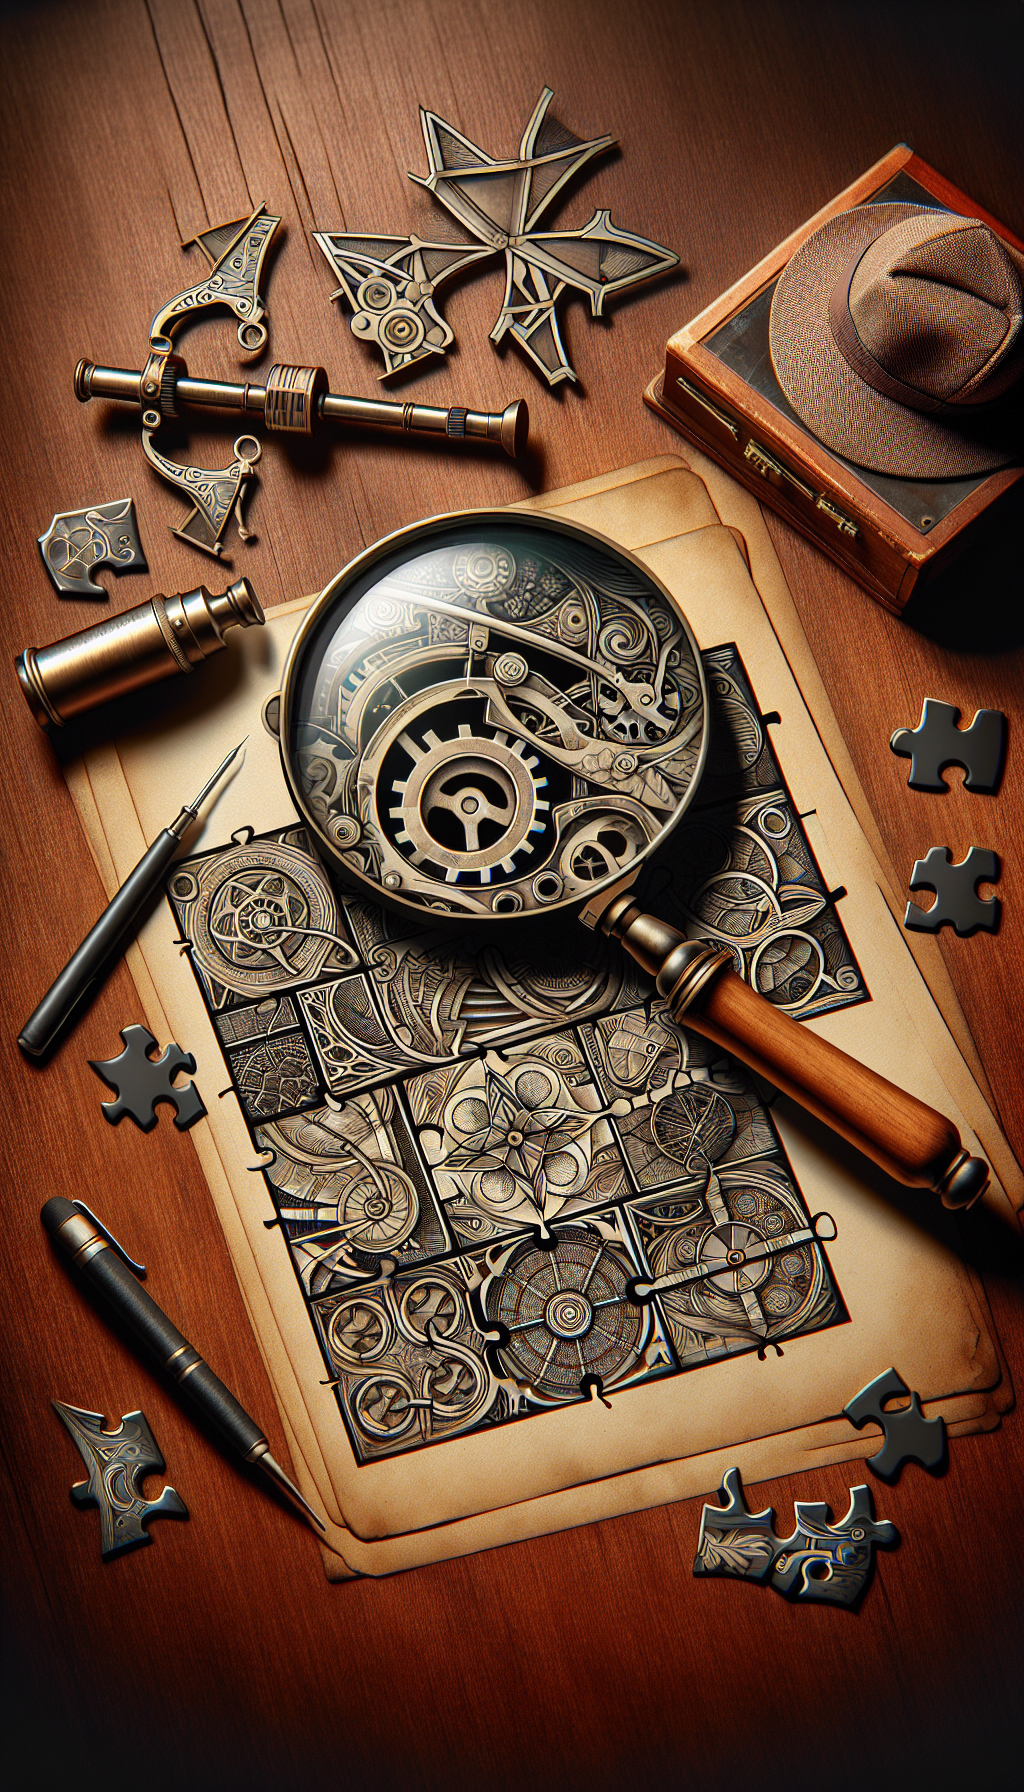 An aged detective desk, beneath a magnifying glass, a rusty object transforms into a clear, ancient tool as puzzle pieces around it fit together, revealing its origin and use. Each piece carries intricate patterns echoing various artistic styles—the juxtaposition of steampunk gears, Art Nouveau swirls, and Cubist angles—symbolizing the diverse techniques in unmasking the artifact's secrets.